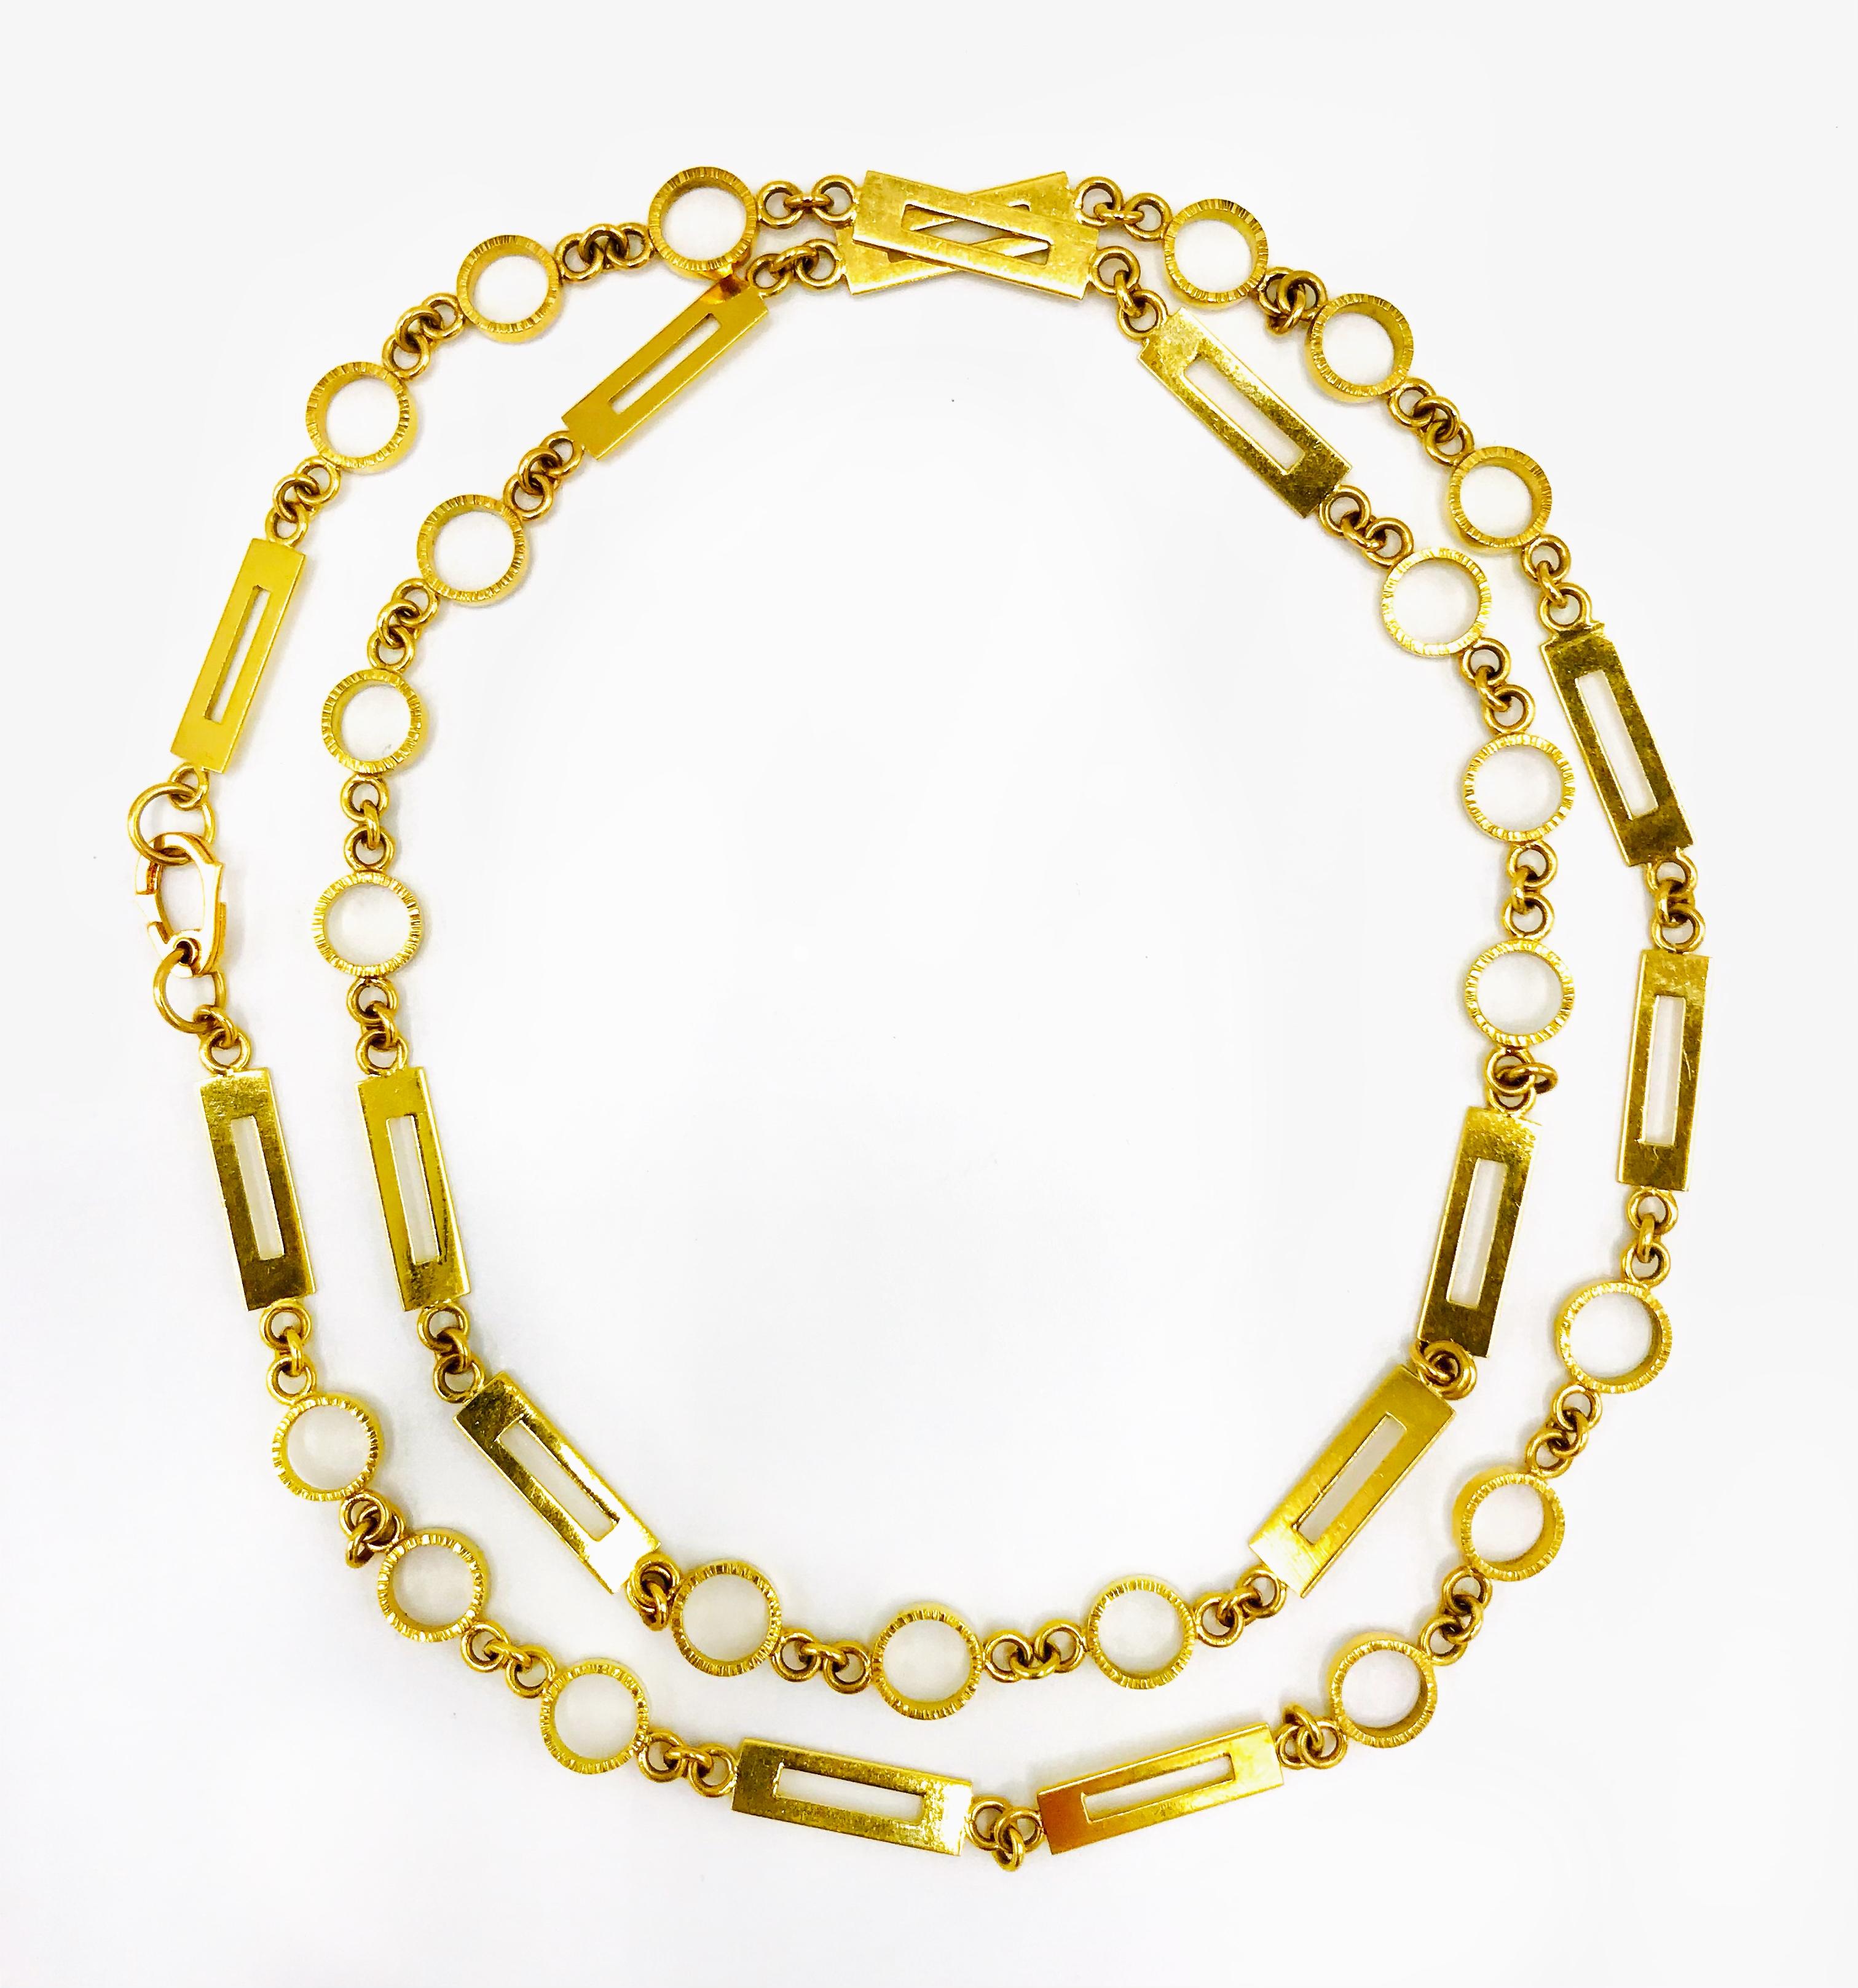 18k (tested) yellow gold chain necklace made of polished and textured gold. Equally great as for layering as wearing solo. 
Measurements: 28